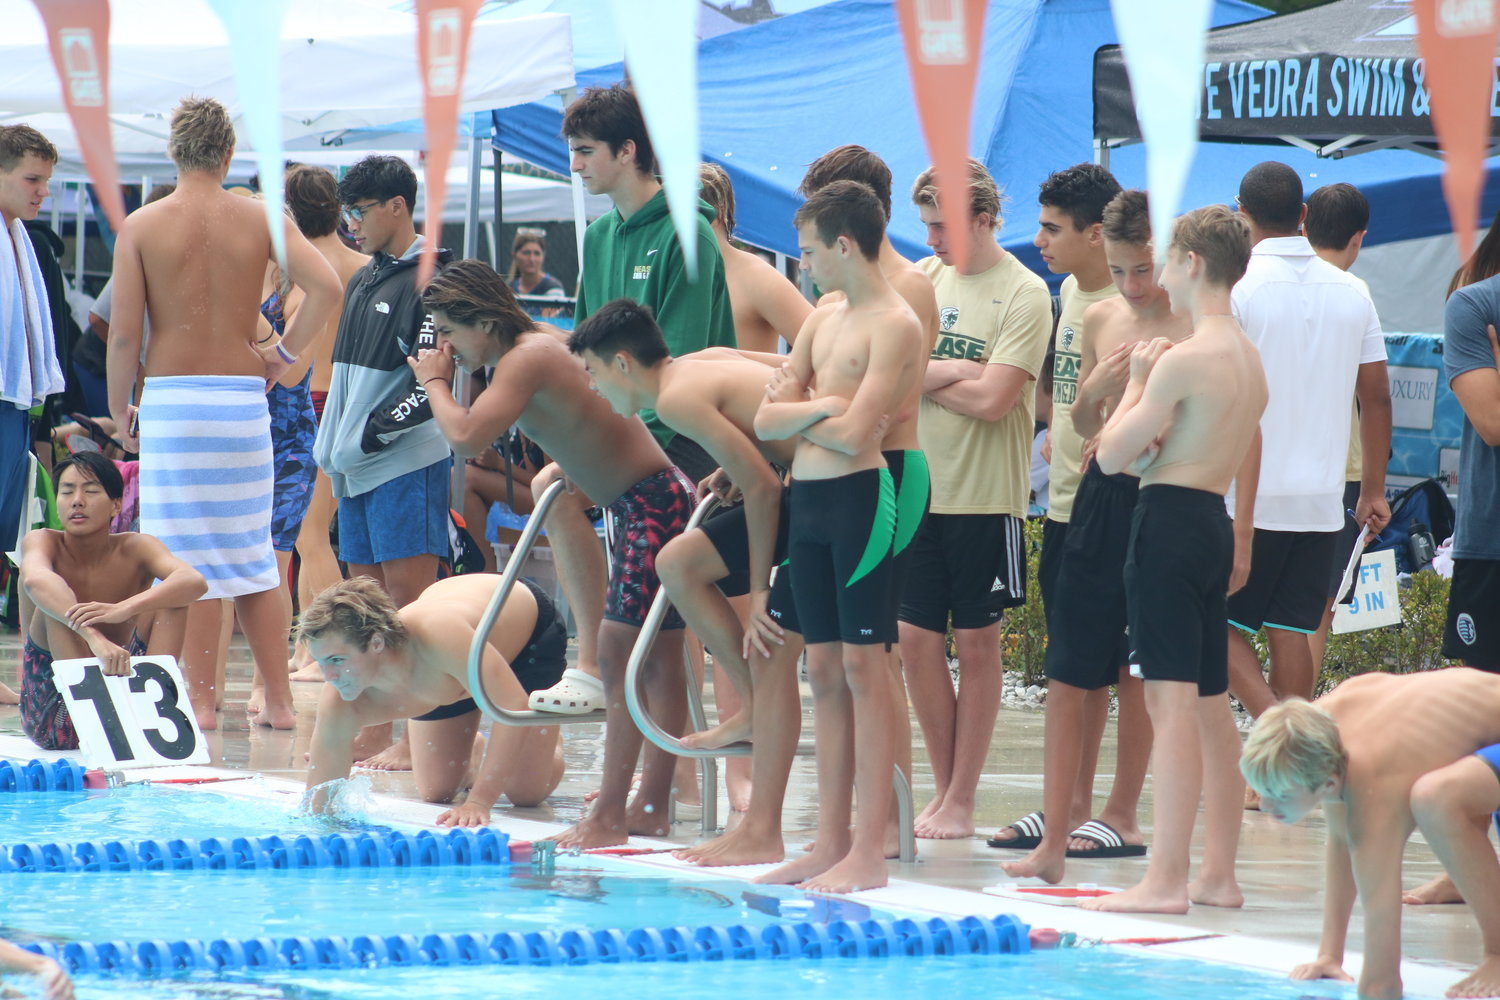 Members of the Nease swim team cheer on one of the teammates during a race.